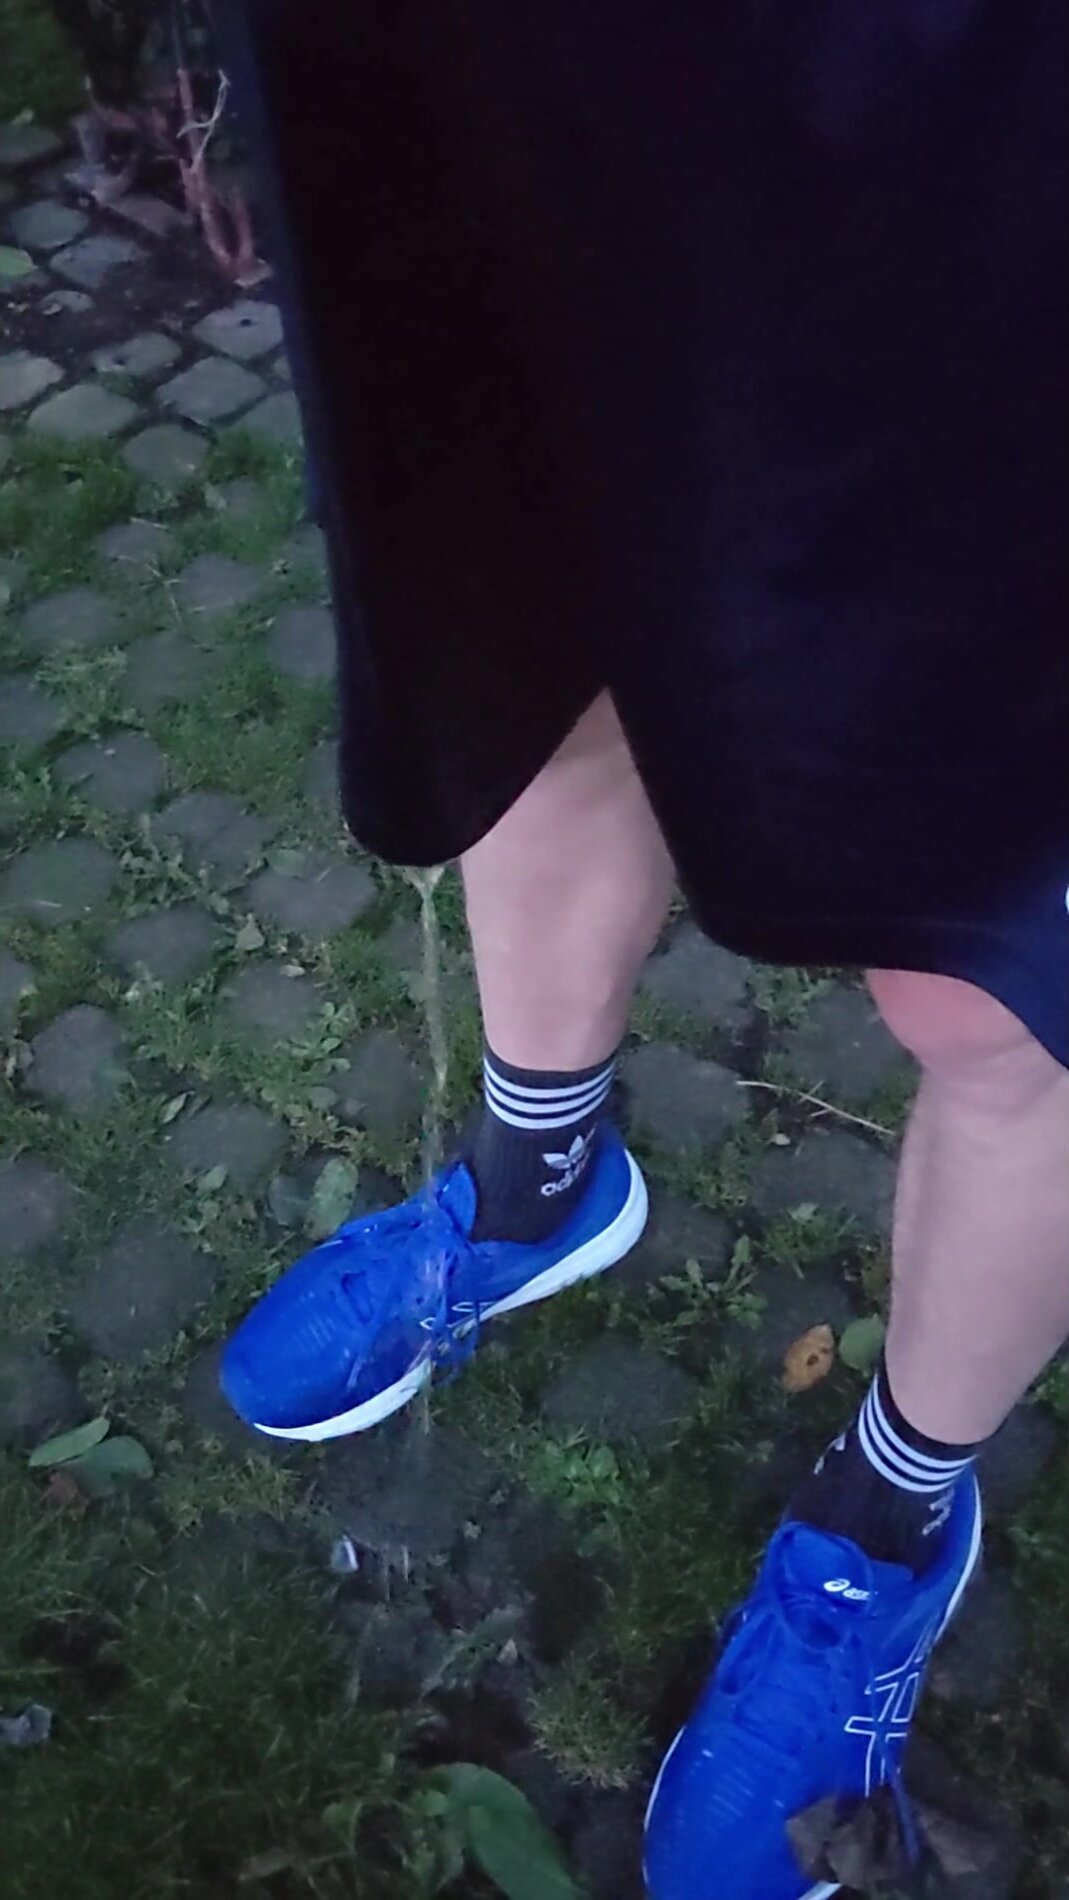 Pissing myself in my football shorts